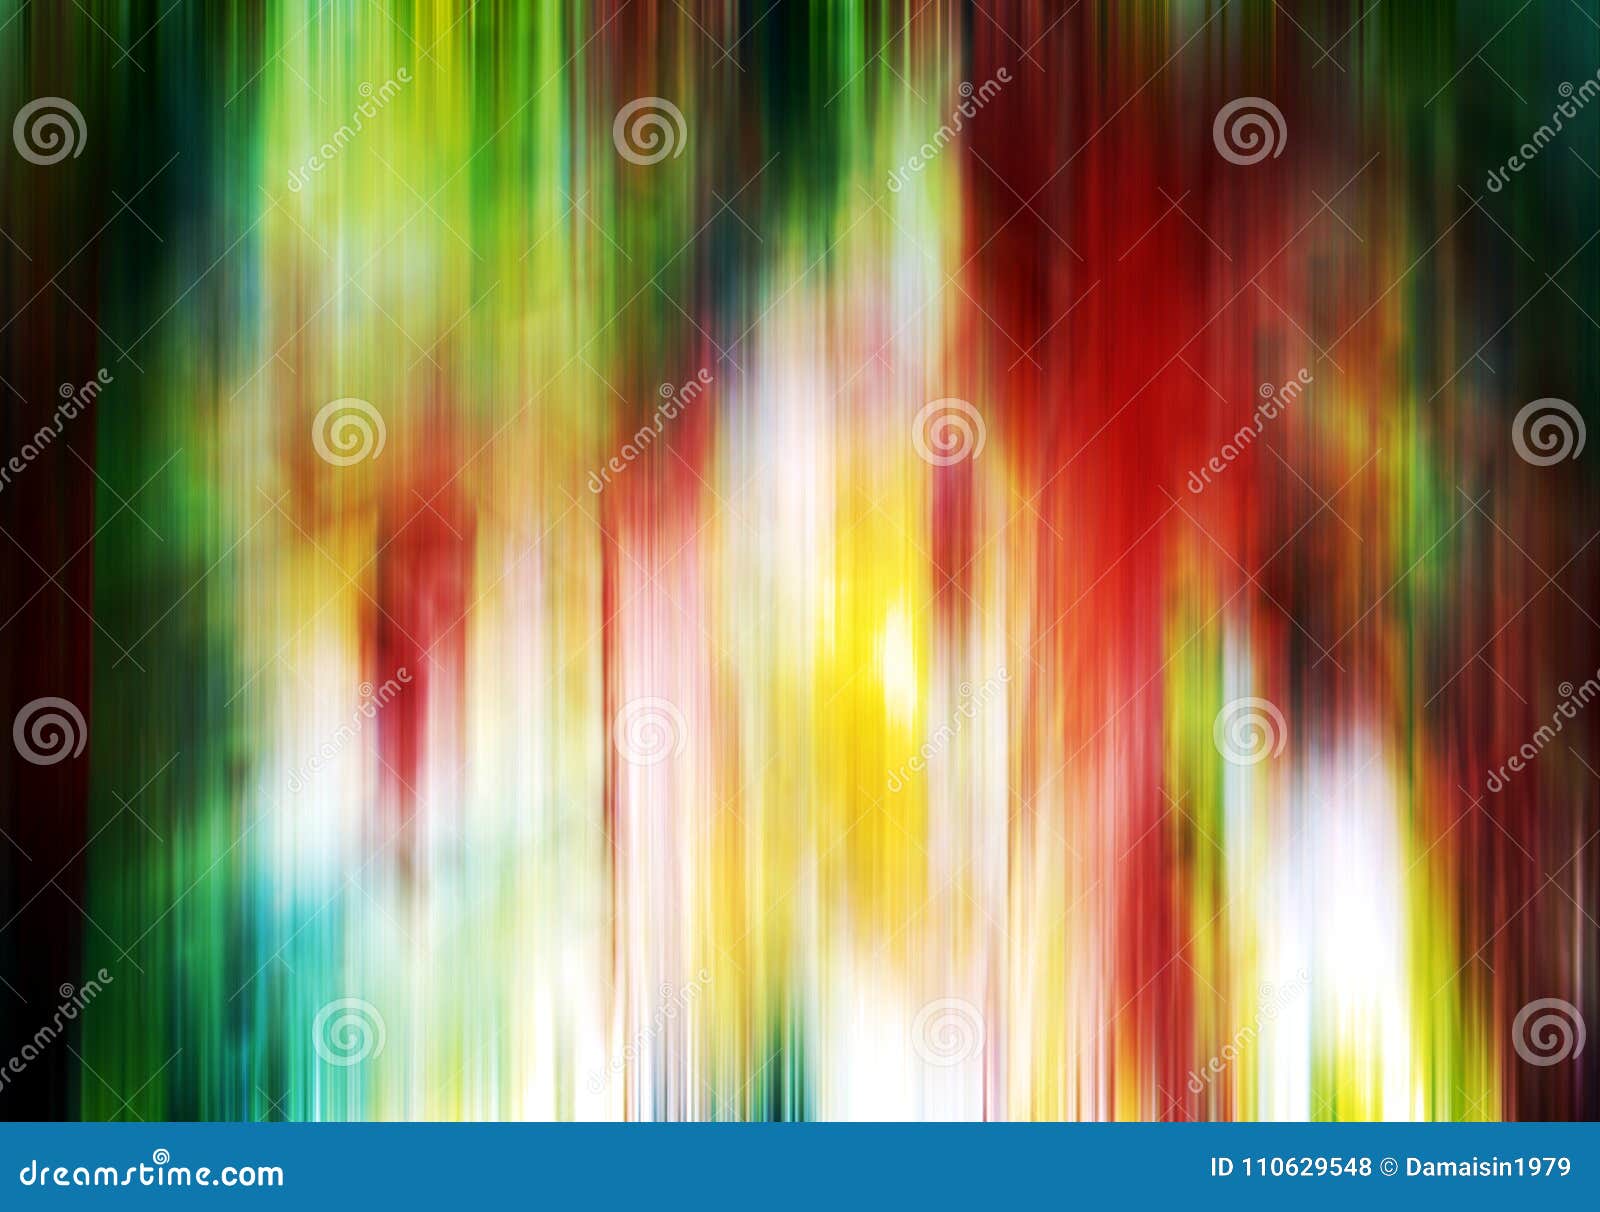 gold blue red green dark shades , s, geometries, abstract creative background